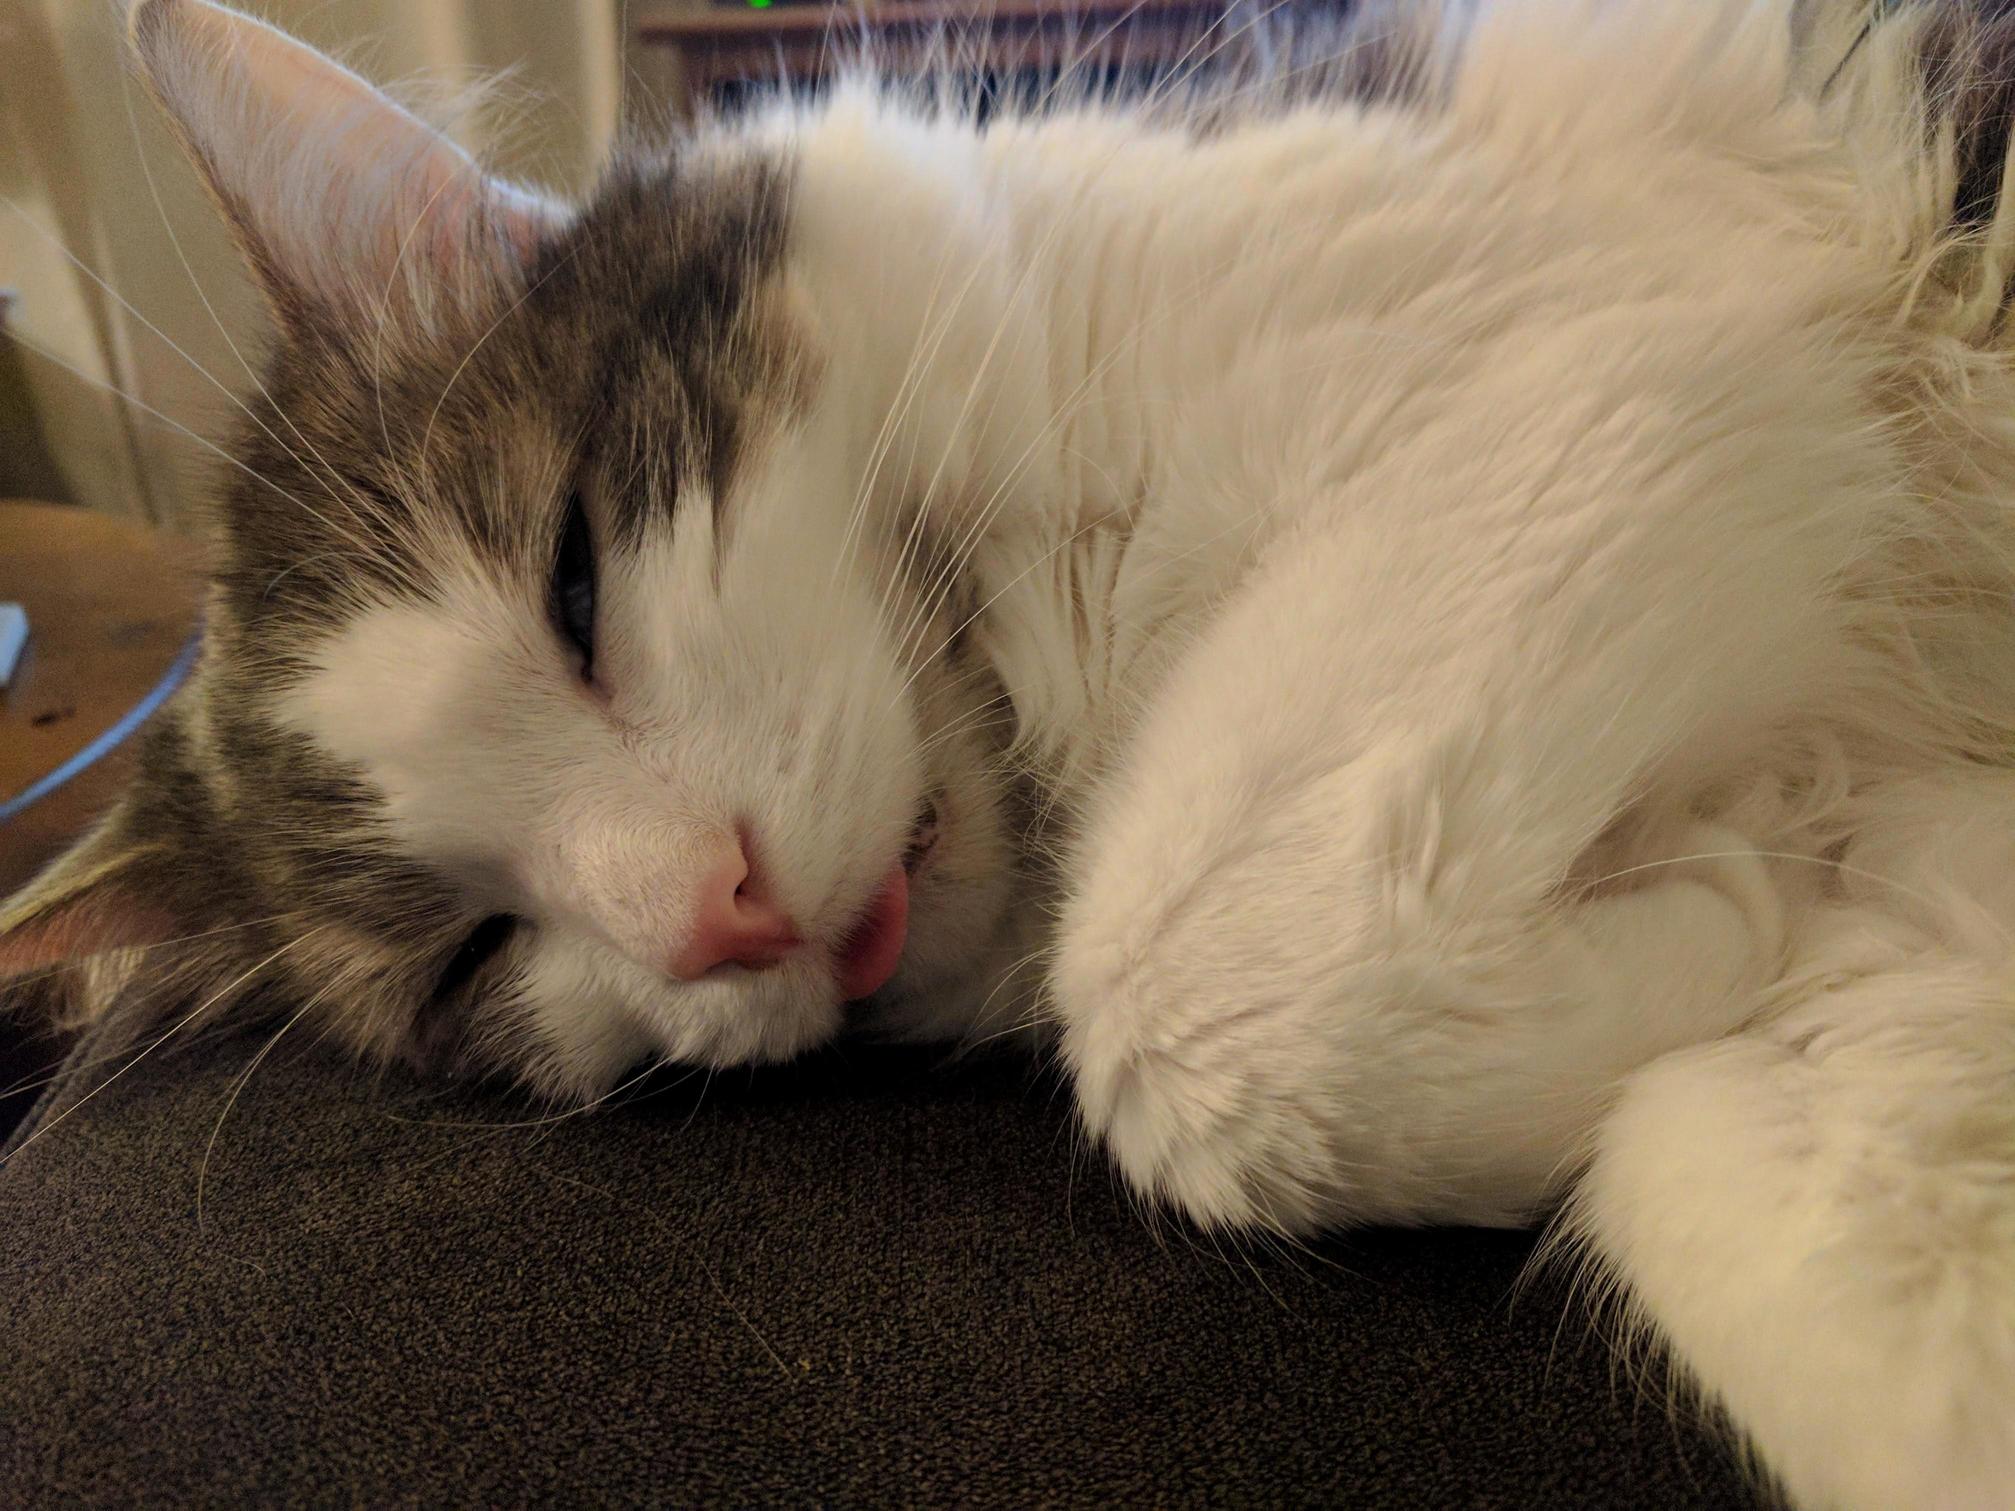 Nap with a side of blep